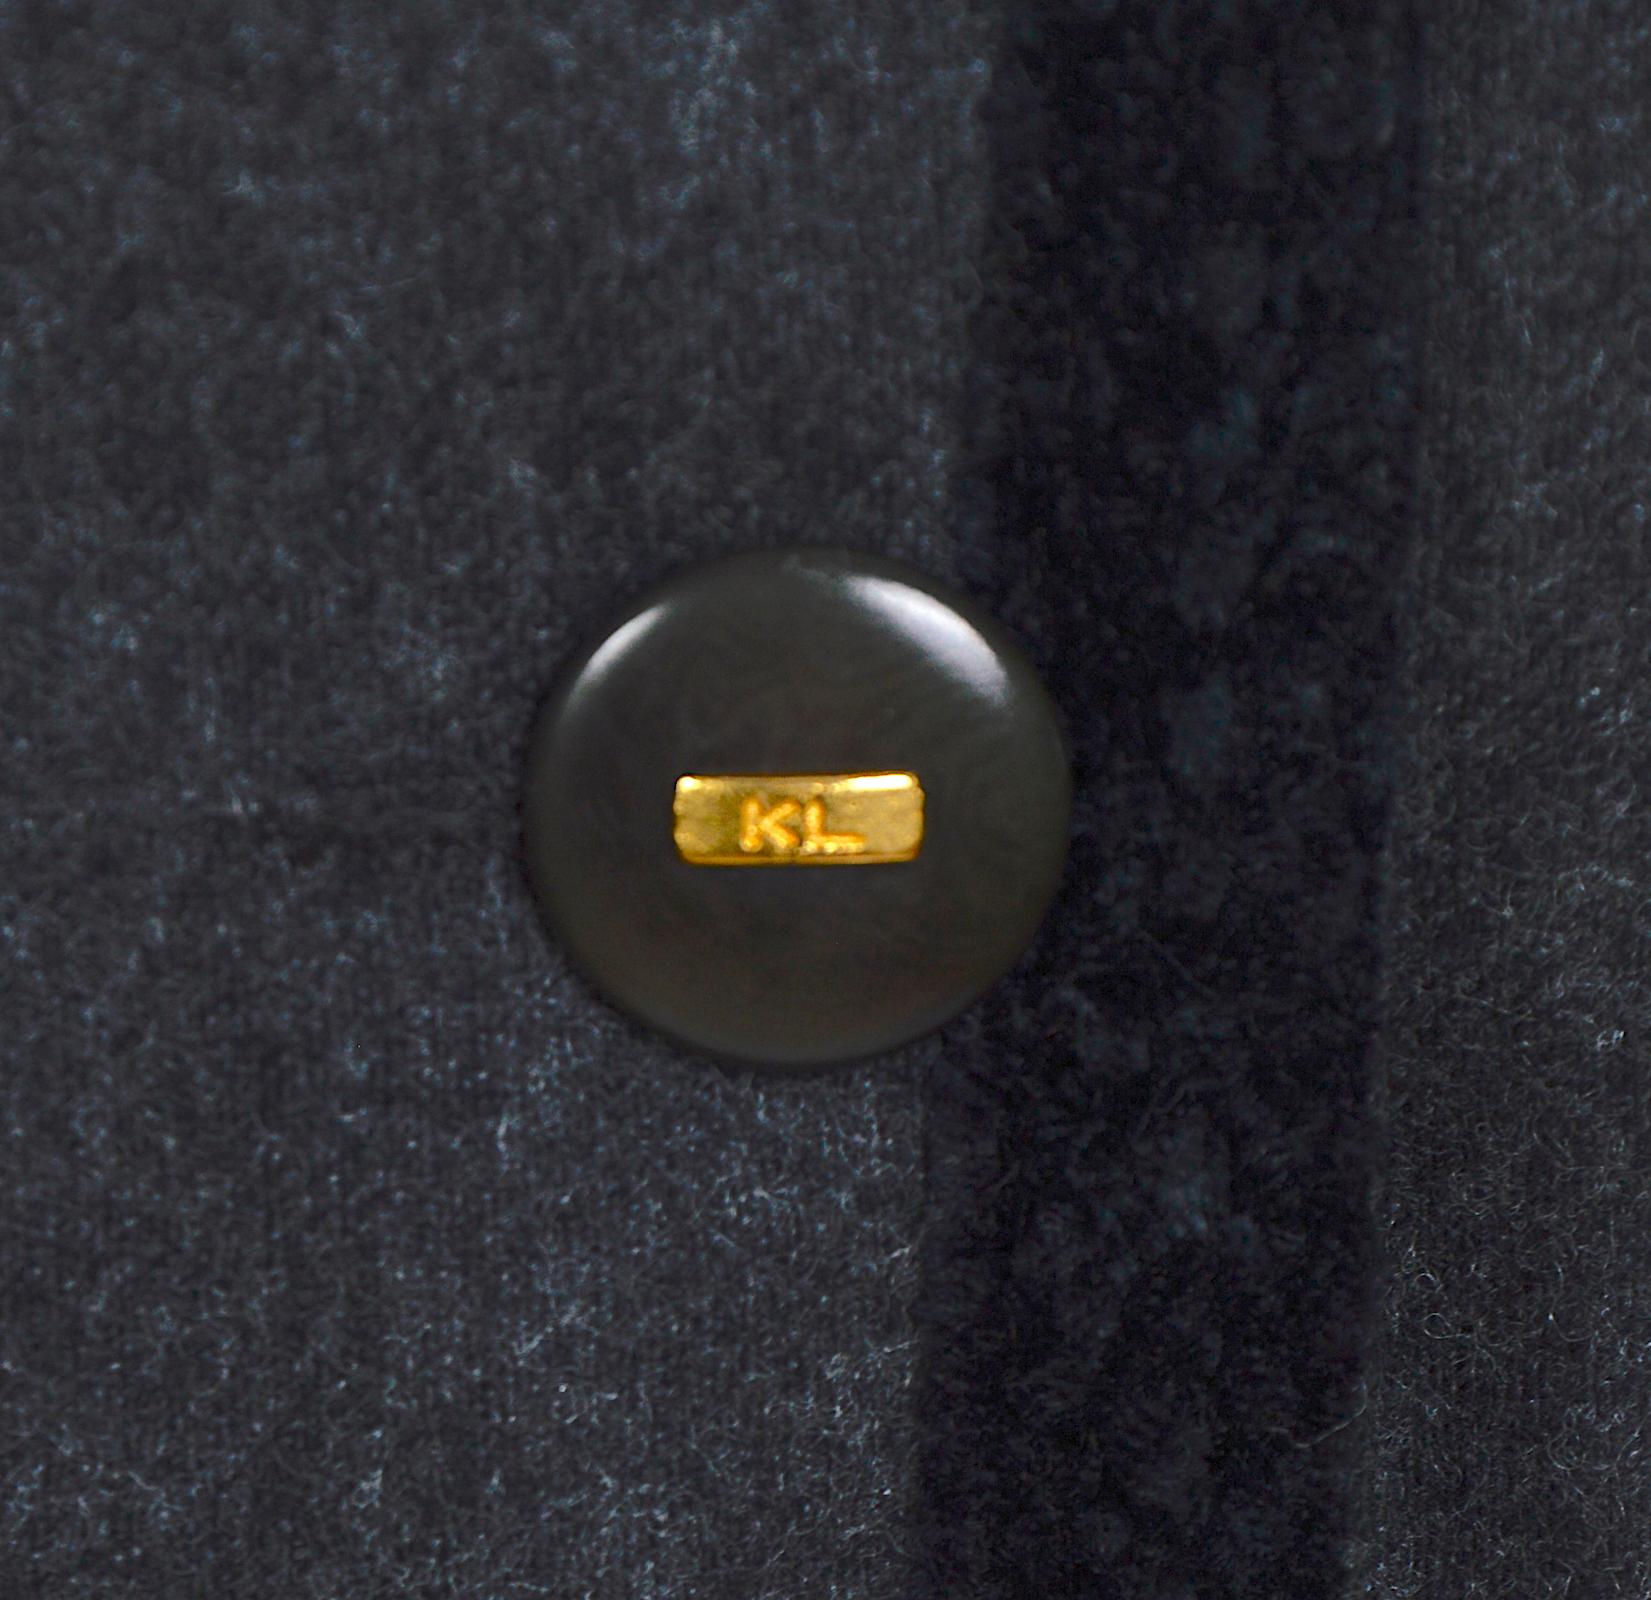 KL by Karl Lagerfeld 1980s grey cashmere & wool mix with KL logo buttons dress For Sale 2